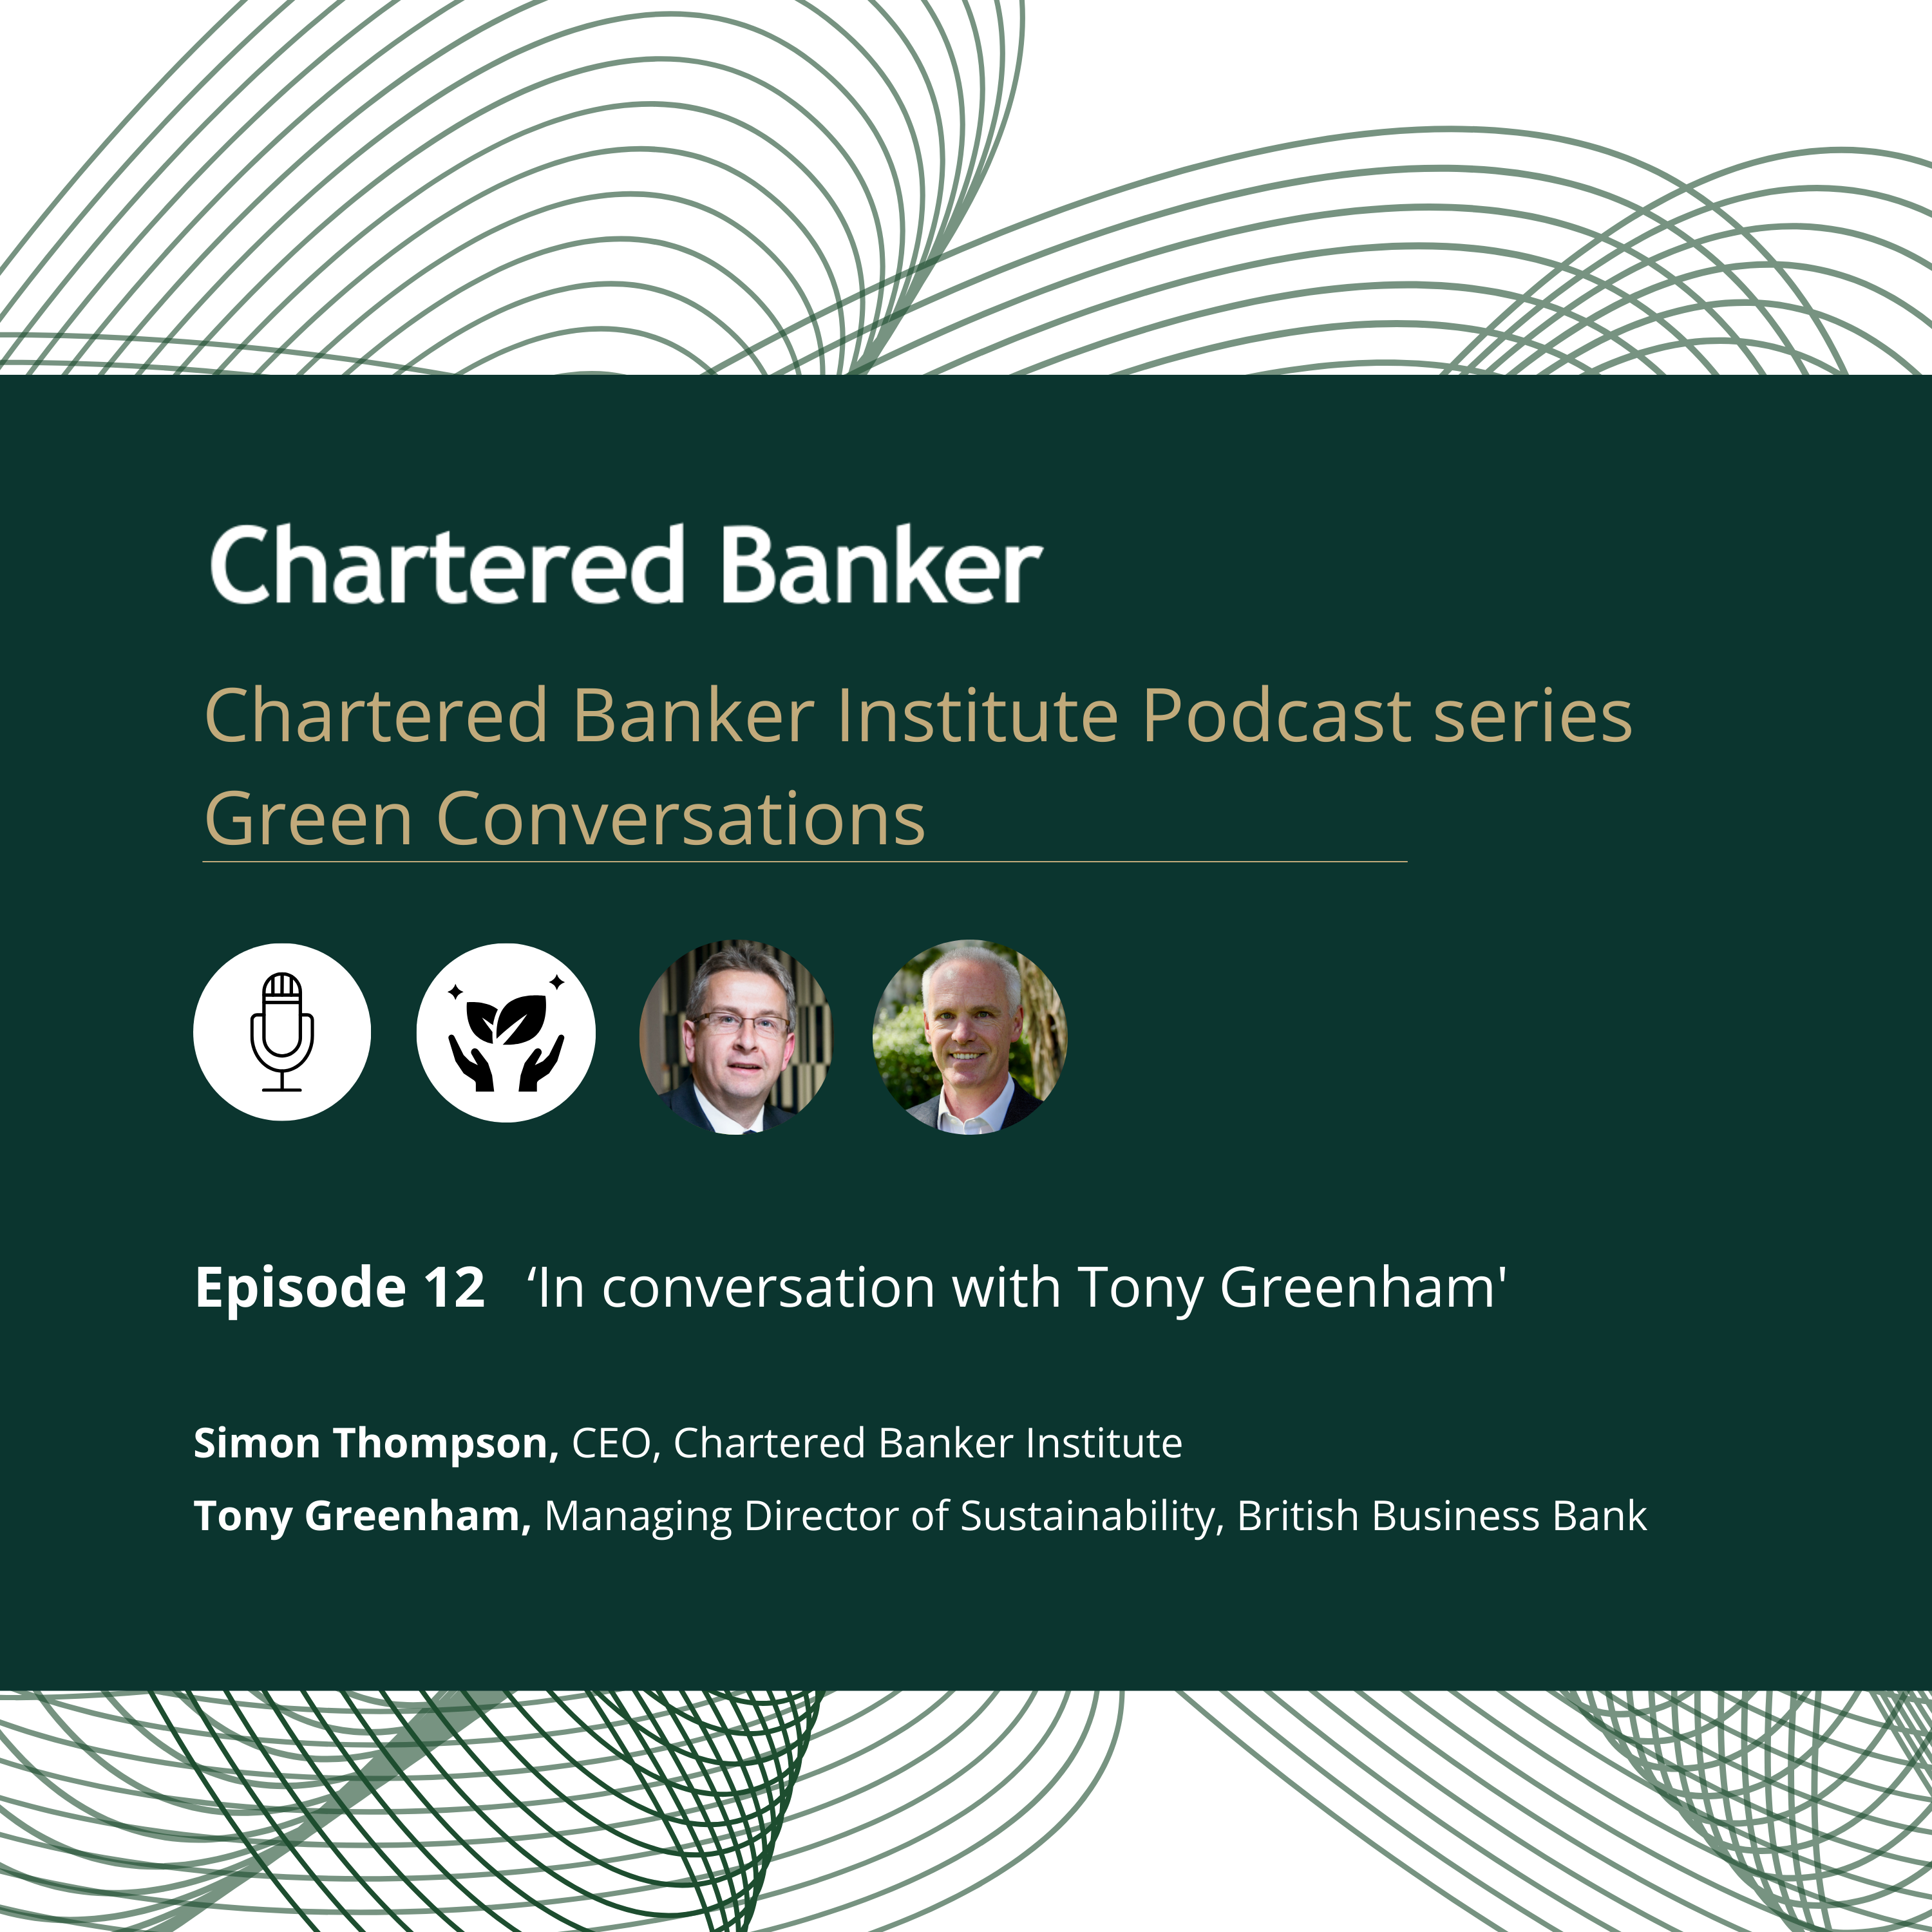 S3 E12 In conversation with Tony Greenham, Managing Director, Sustainability at the British Business Bank